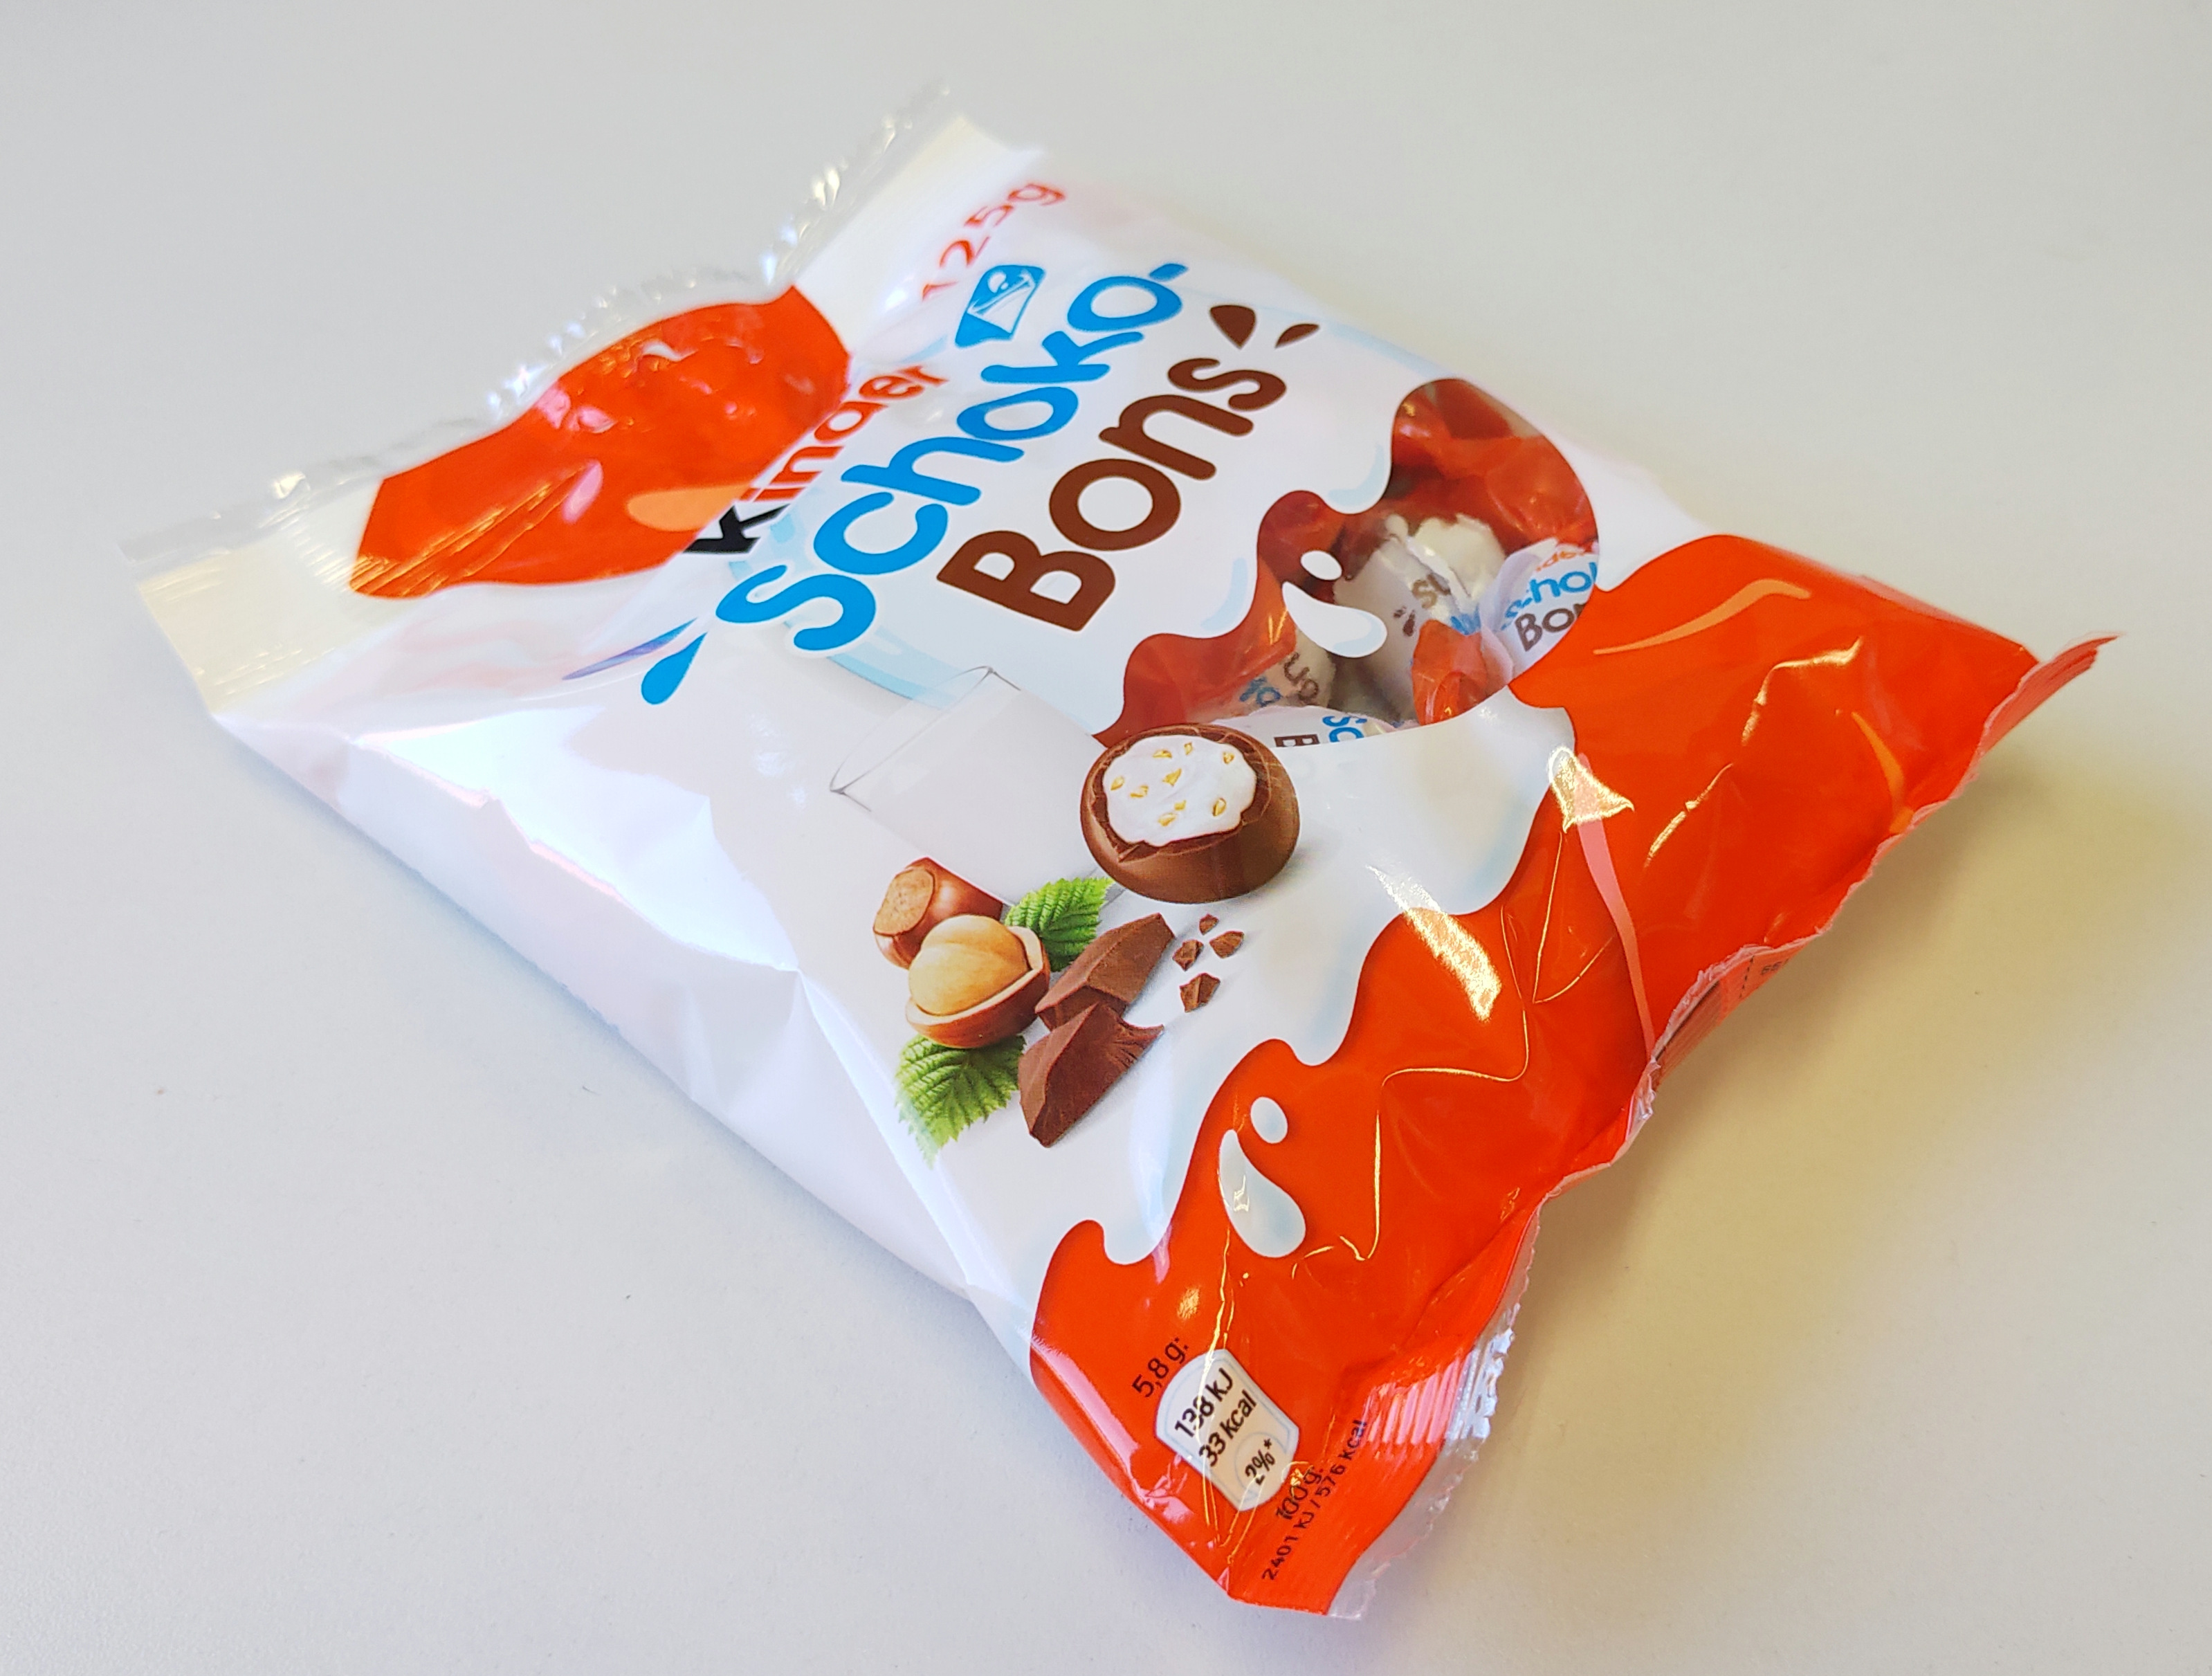 Kinder Schoko-Bons Milk Chocolate with Milk Filling and Nuts 125 g (4.4oz)